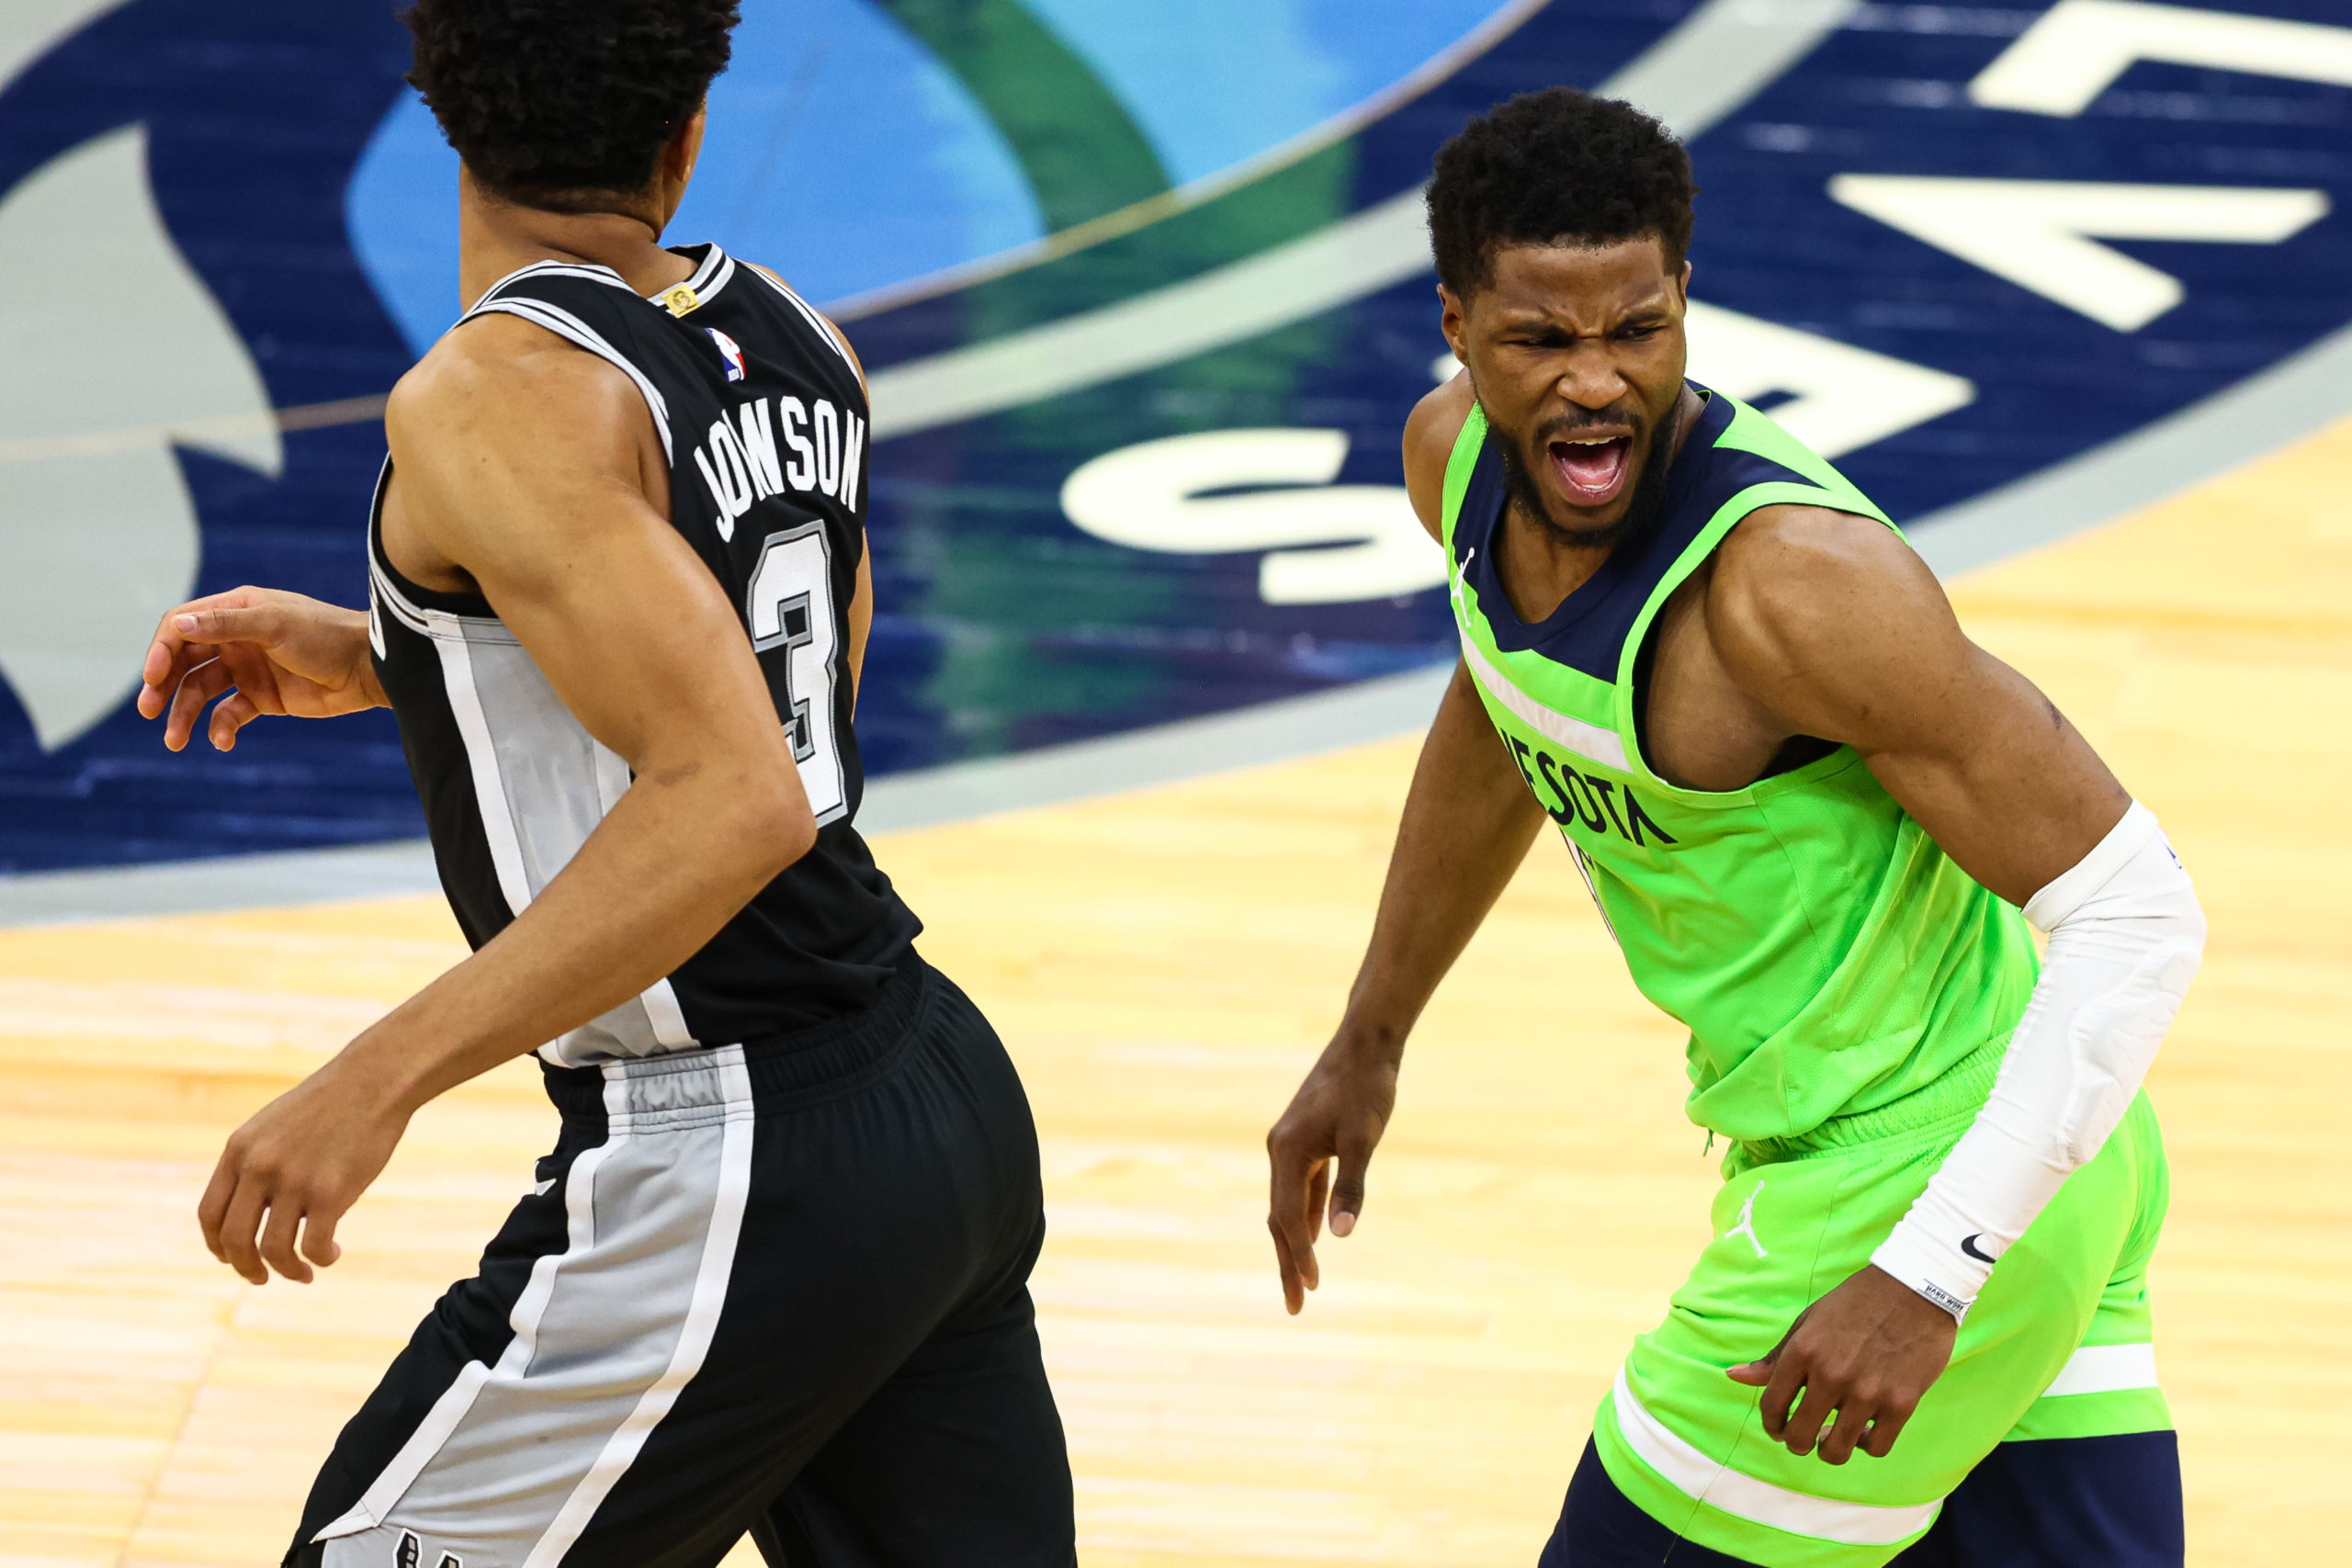 After suspension, Timberwolves guard Malik Beasley says he's an improved man